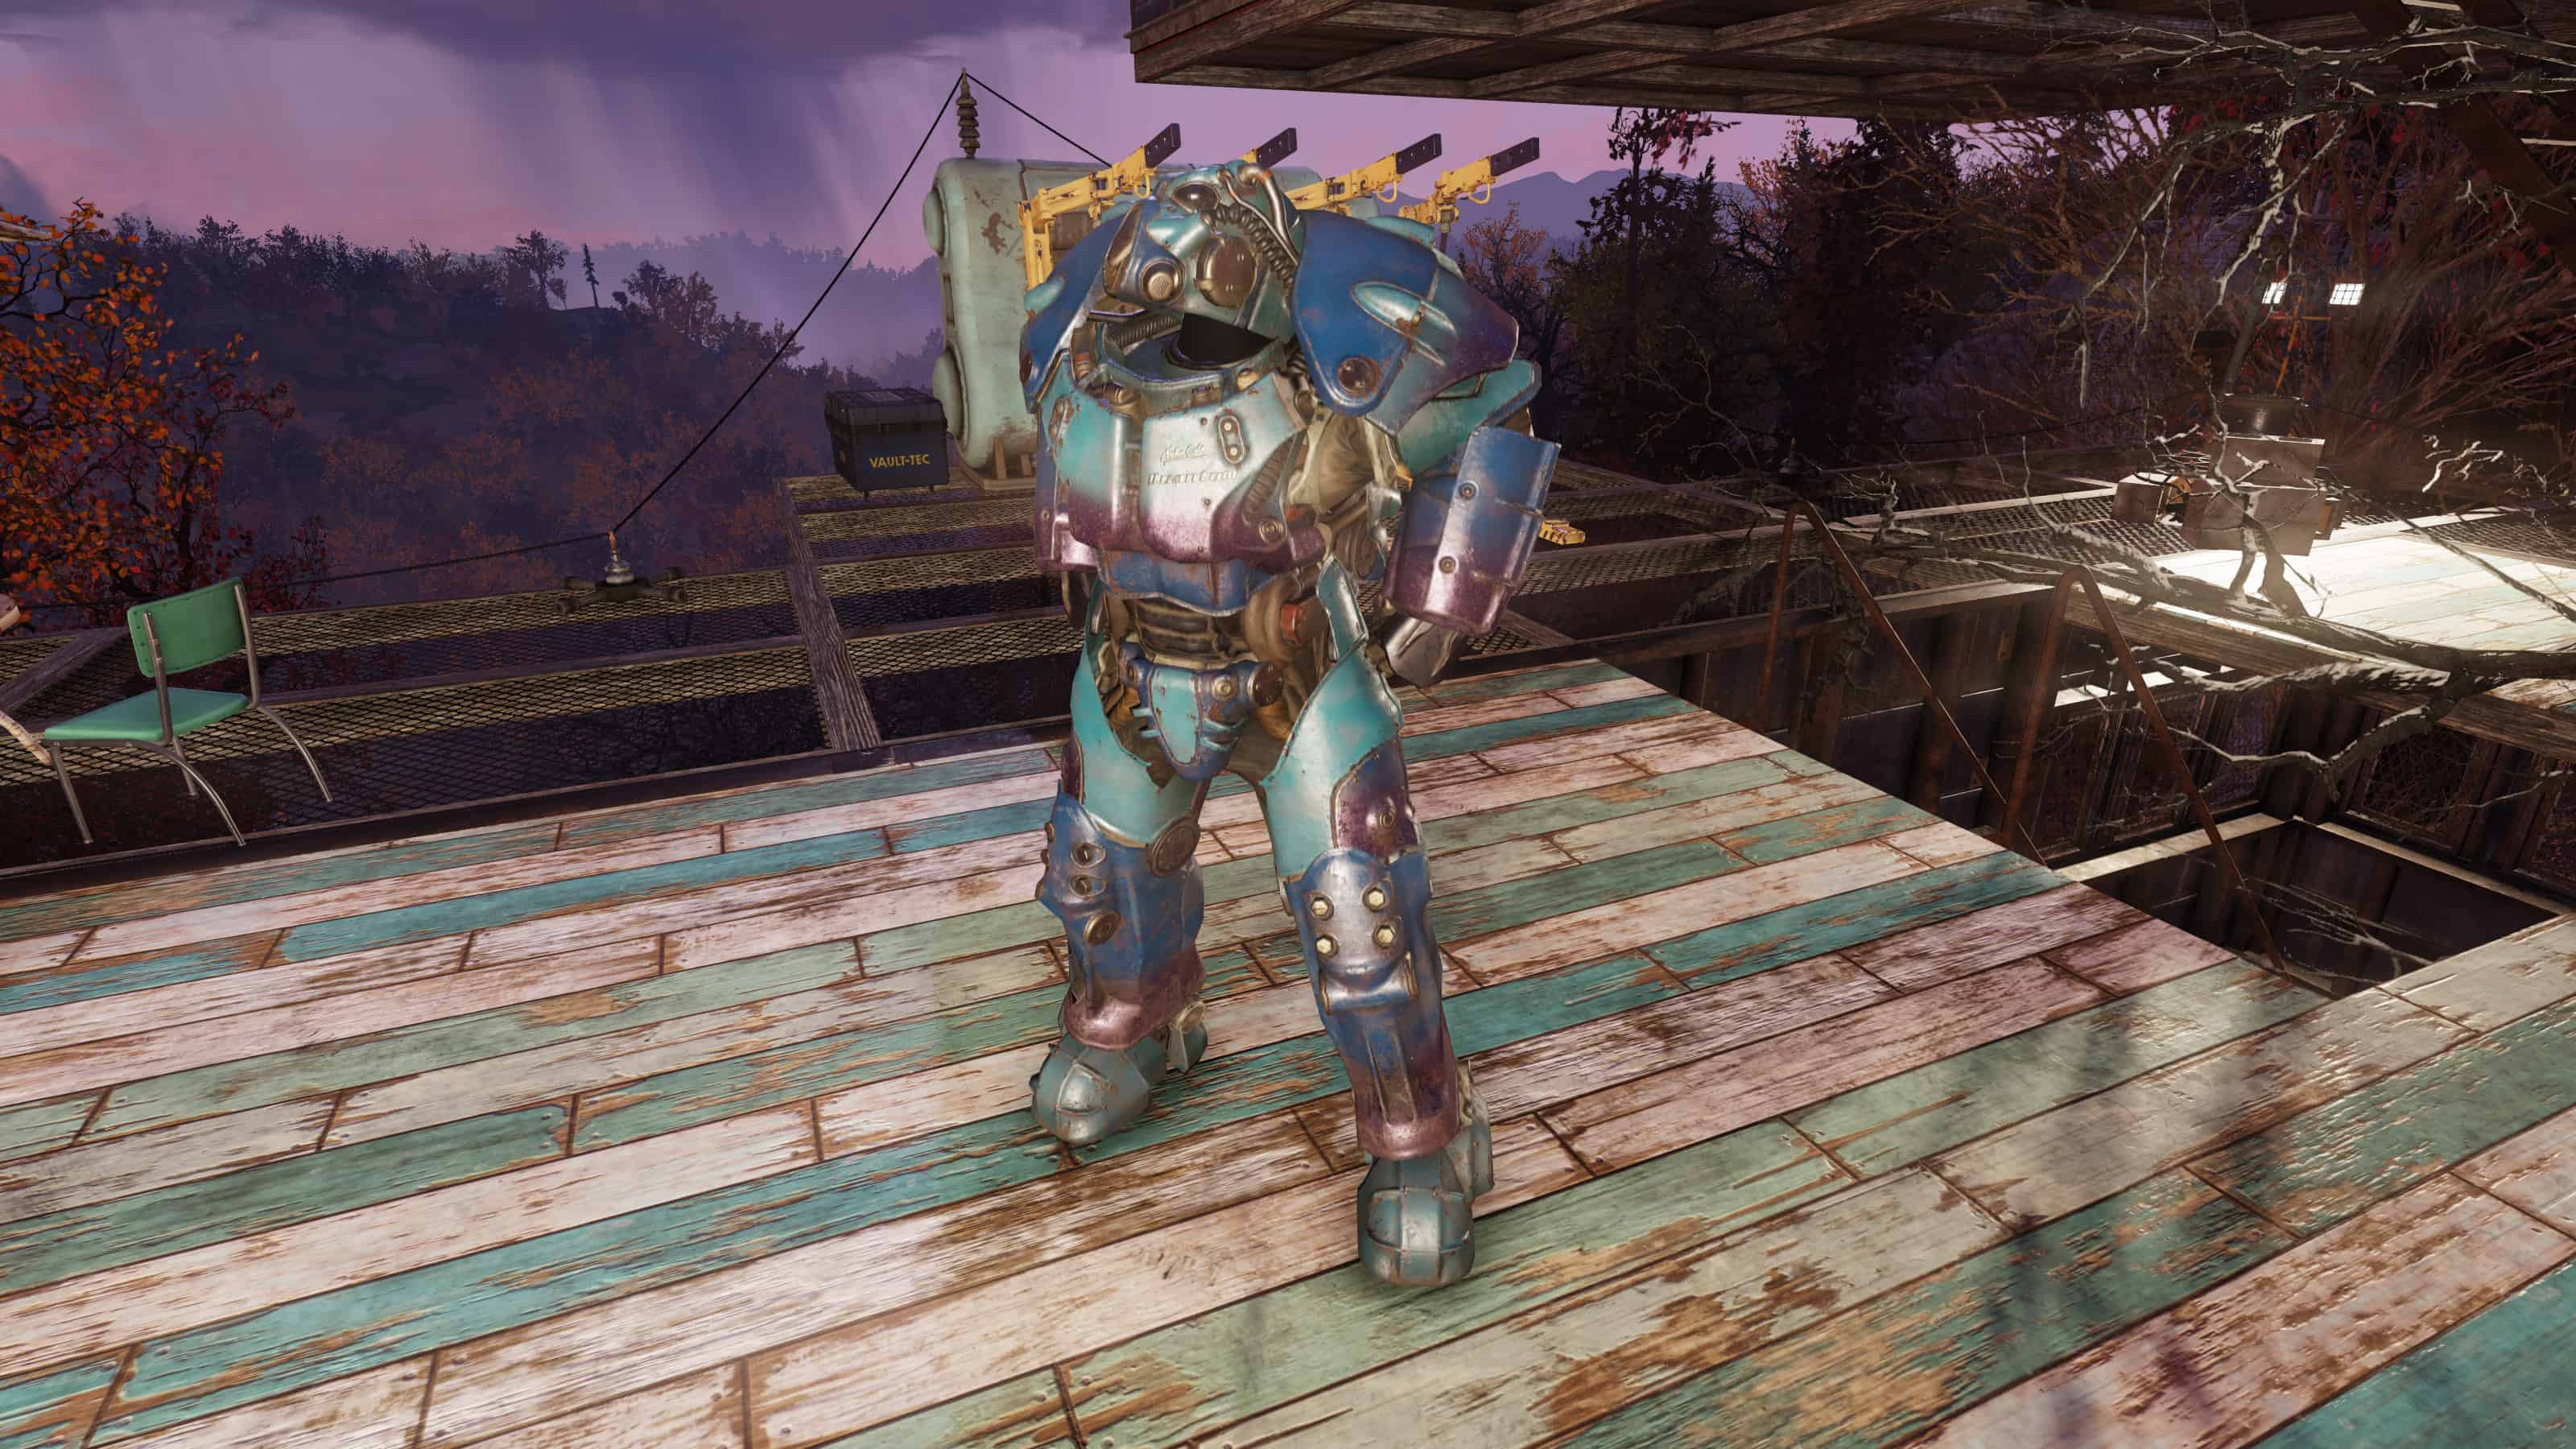 This mod contains the Nuka Cola and Quantum Power Armor Skins, upscaled to ...